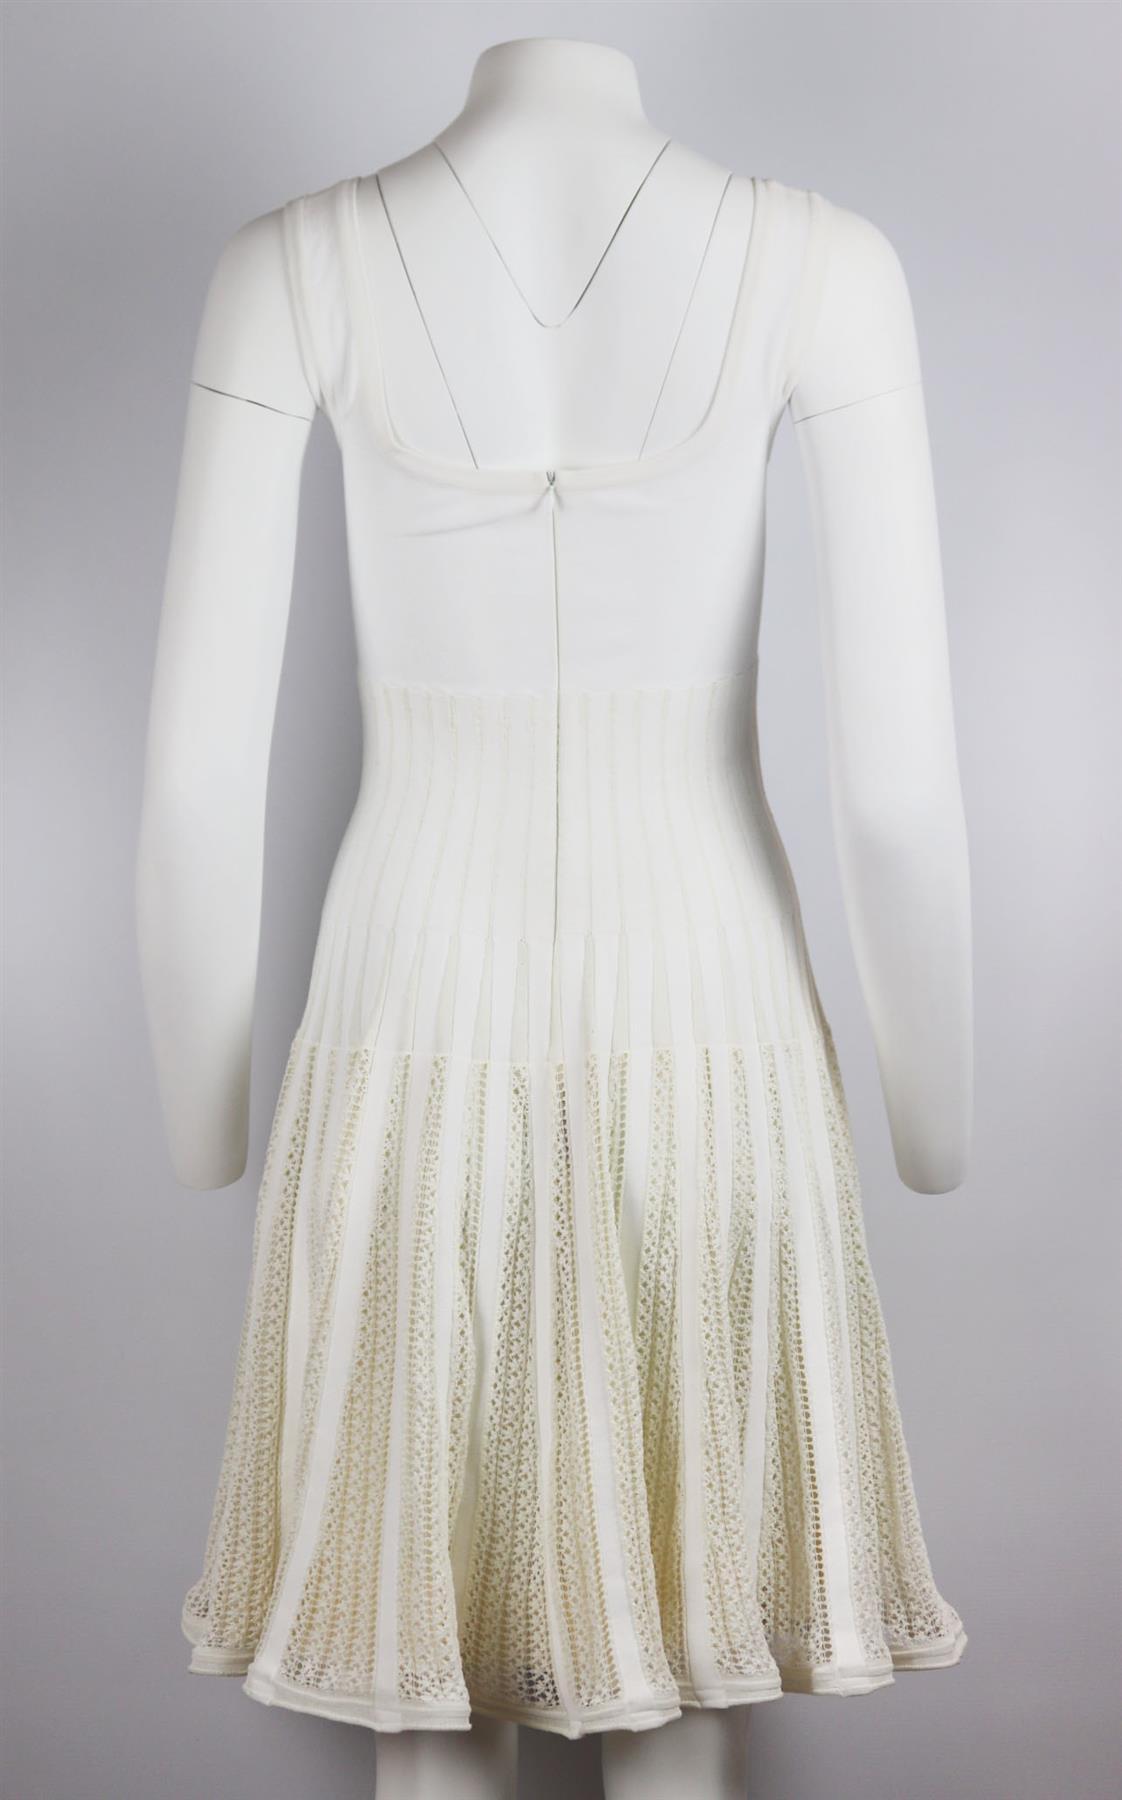 Azzedine Alaïa famously shunned fashion seasons and created beautiful, timeless collections instead – this dress has been knitted by artisans in Italy, this cotton-blend mini dress is detailed with soft crochet on the swishy skirt. White crocheted